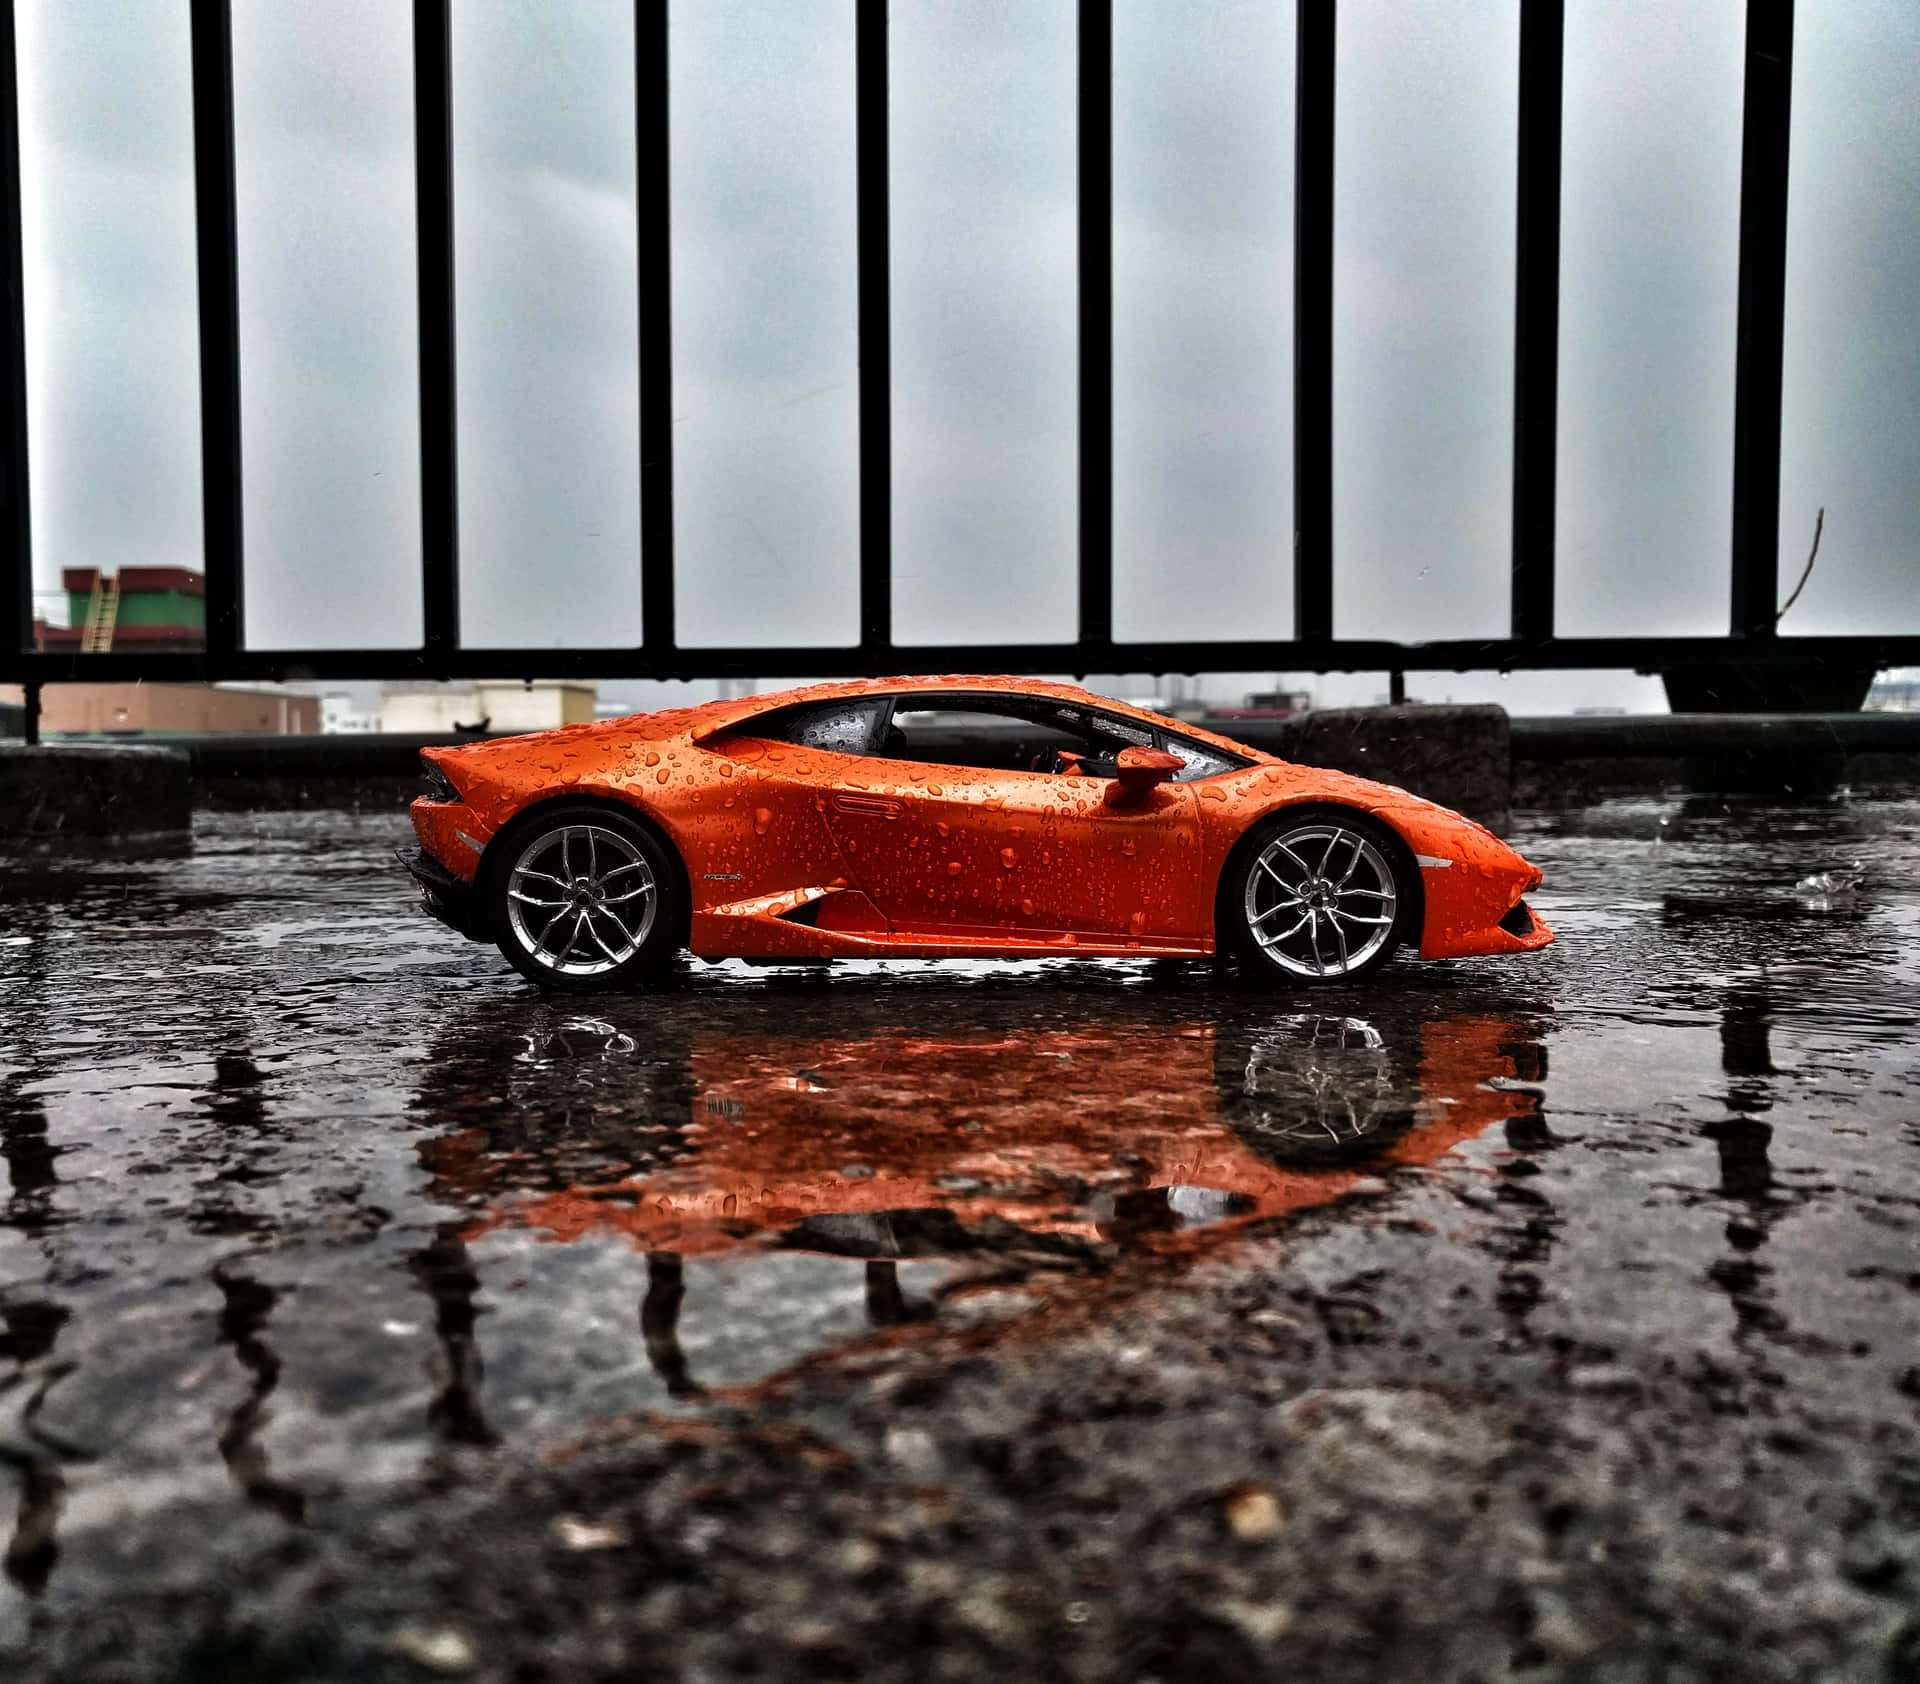 A Toy Car Is Sitting In A Puddle Of Water